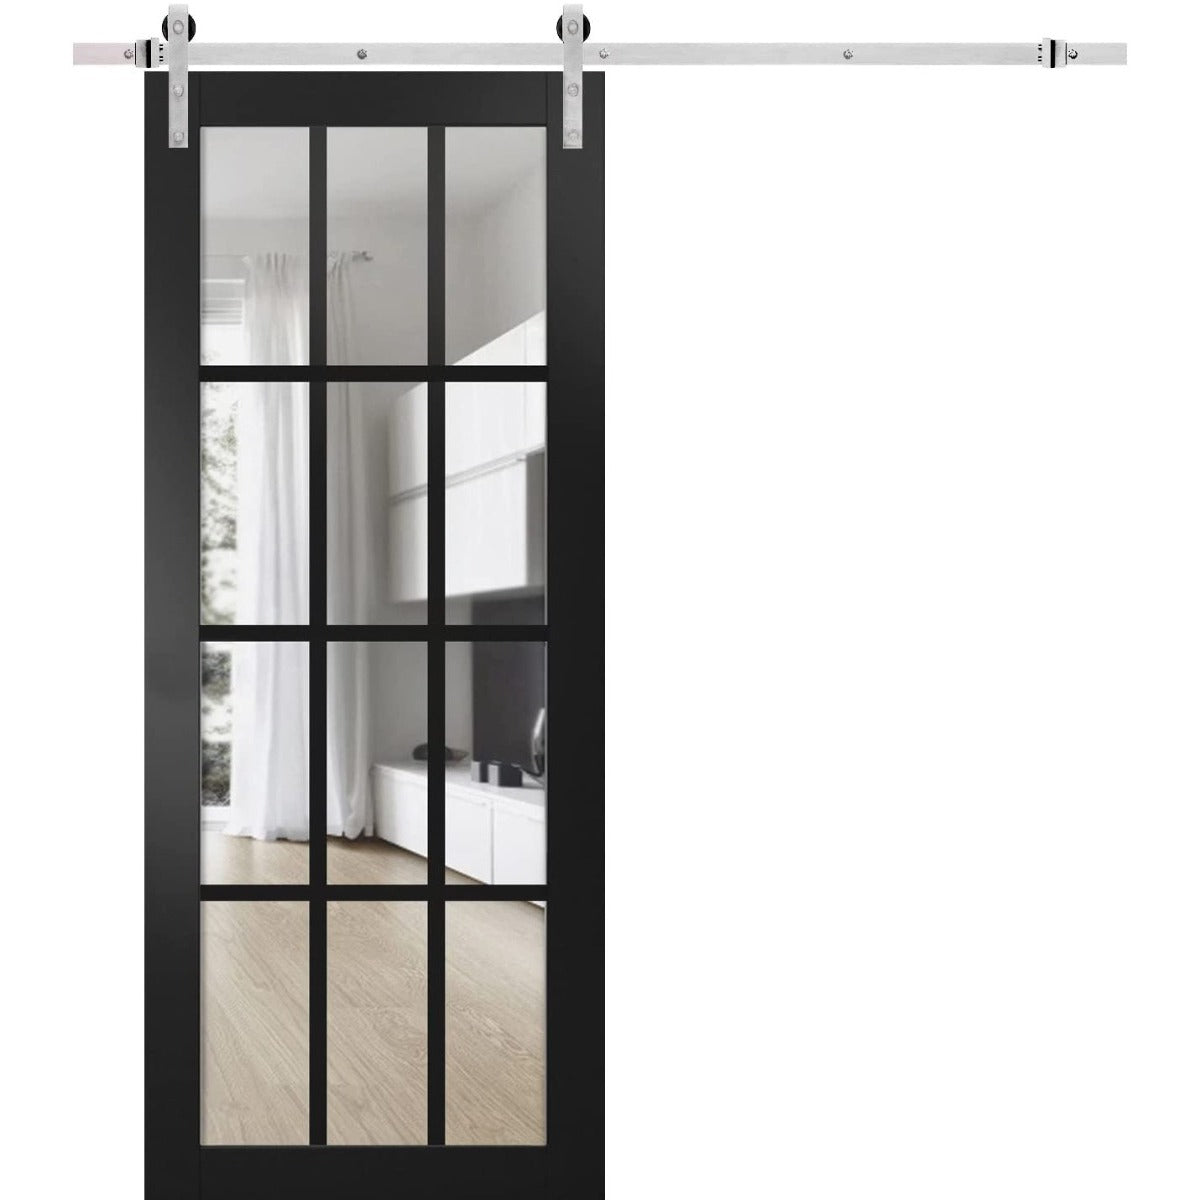 Felicia 3355 Matte Black Barn Door with 12 Lites Clear Glass and Silver Finish Rail